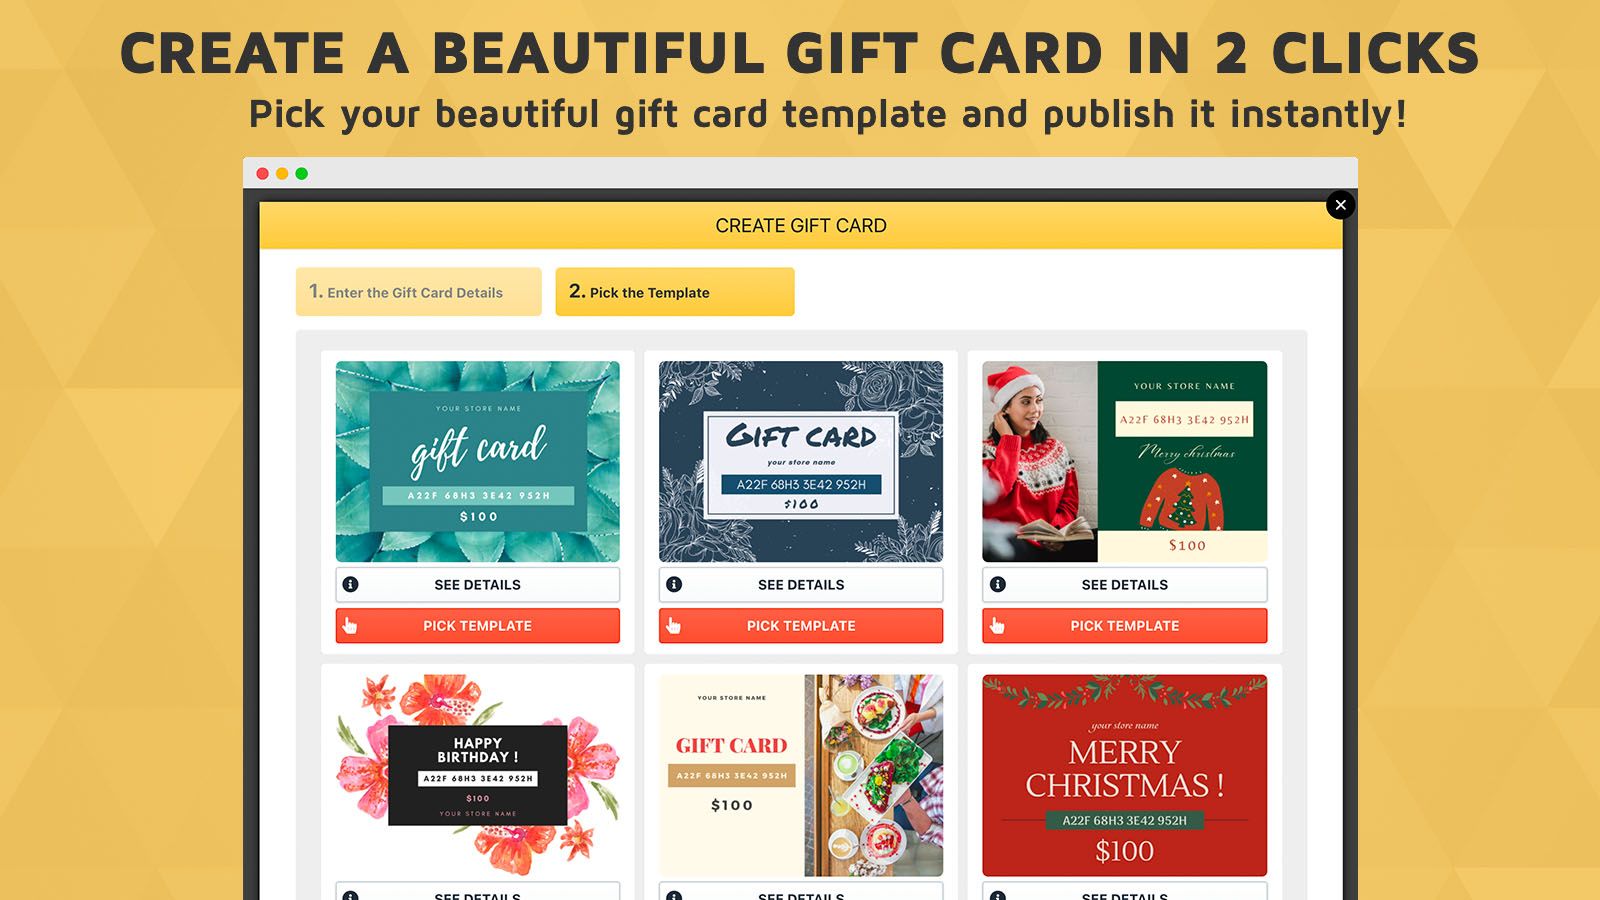 Pick from a dozen of beautiful gift cards templates